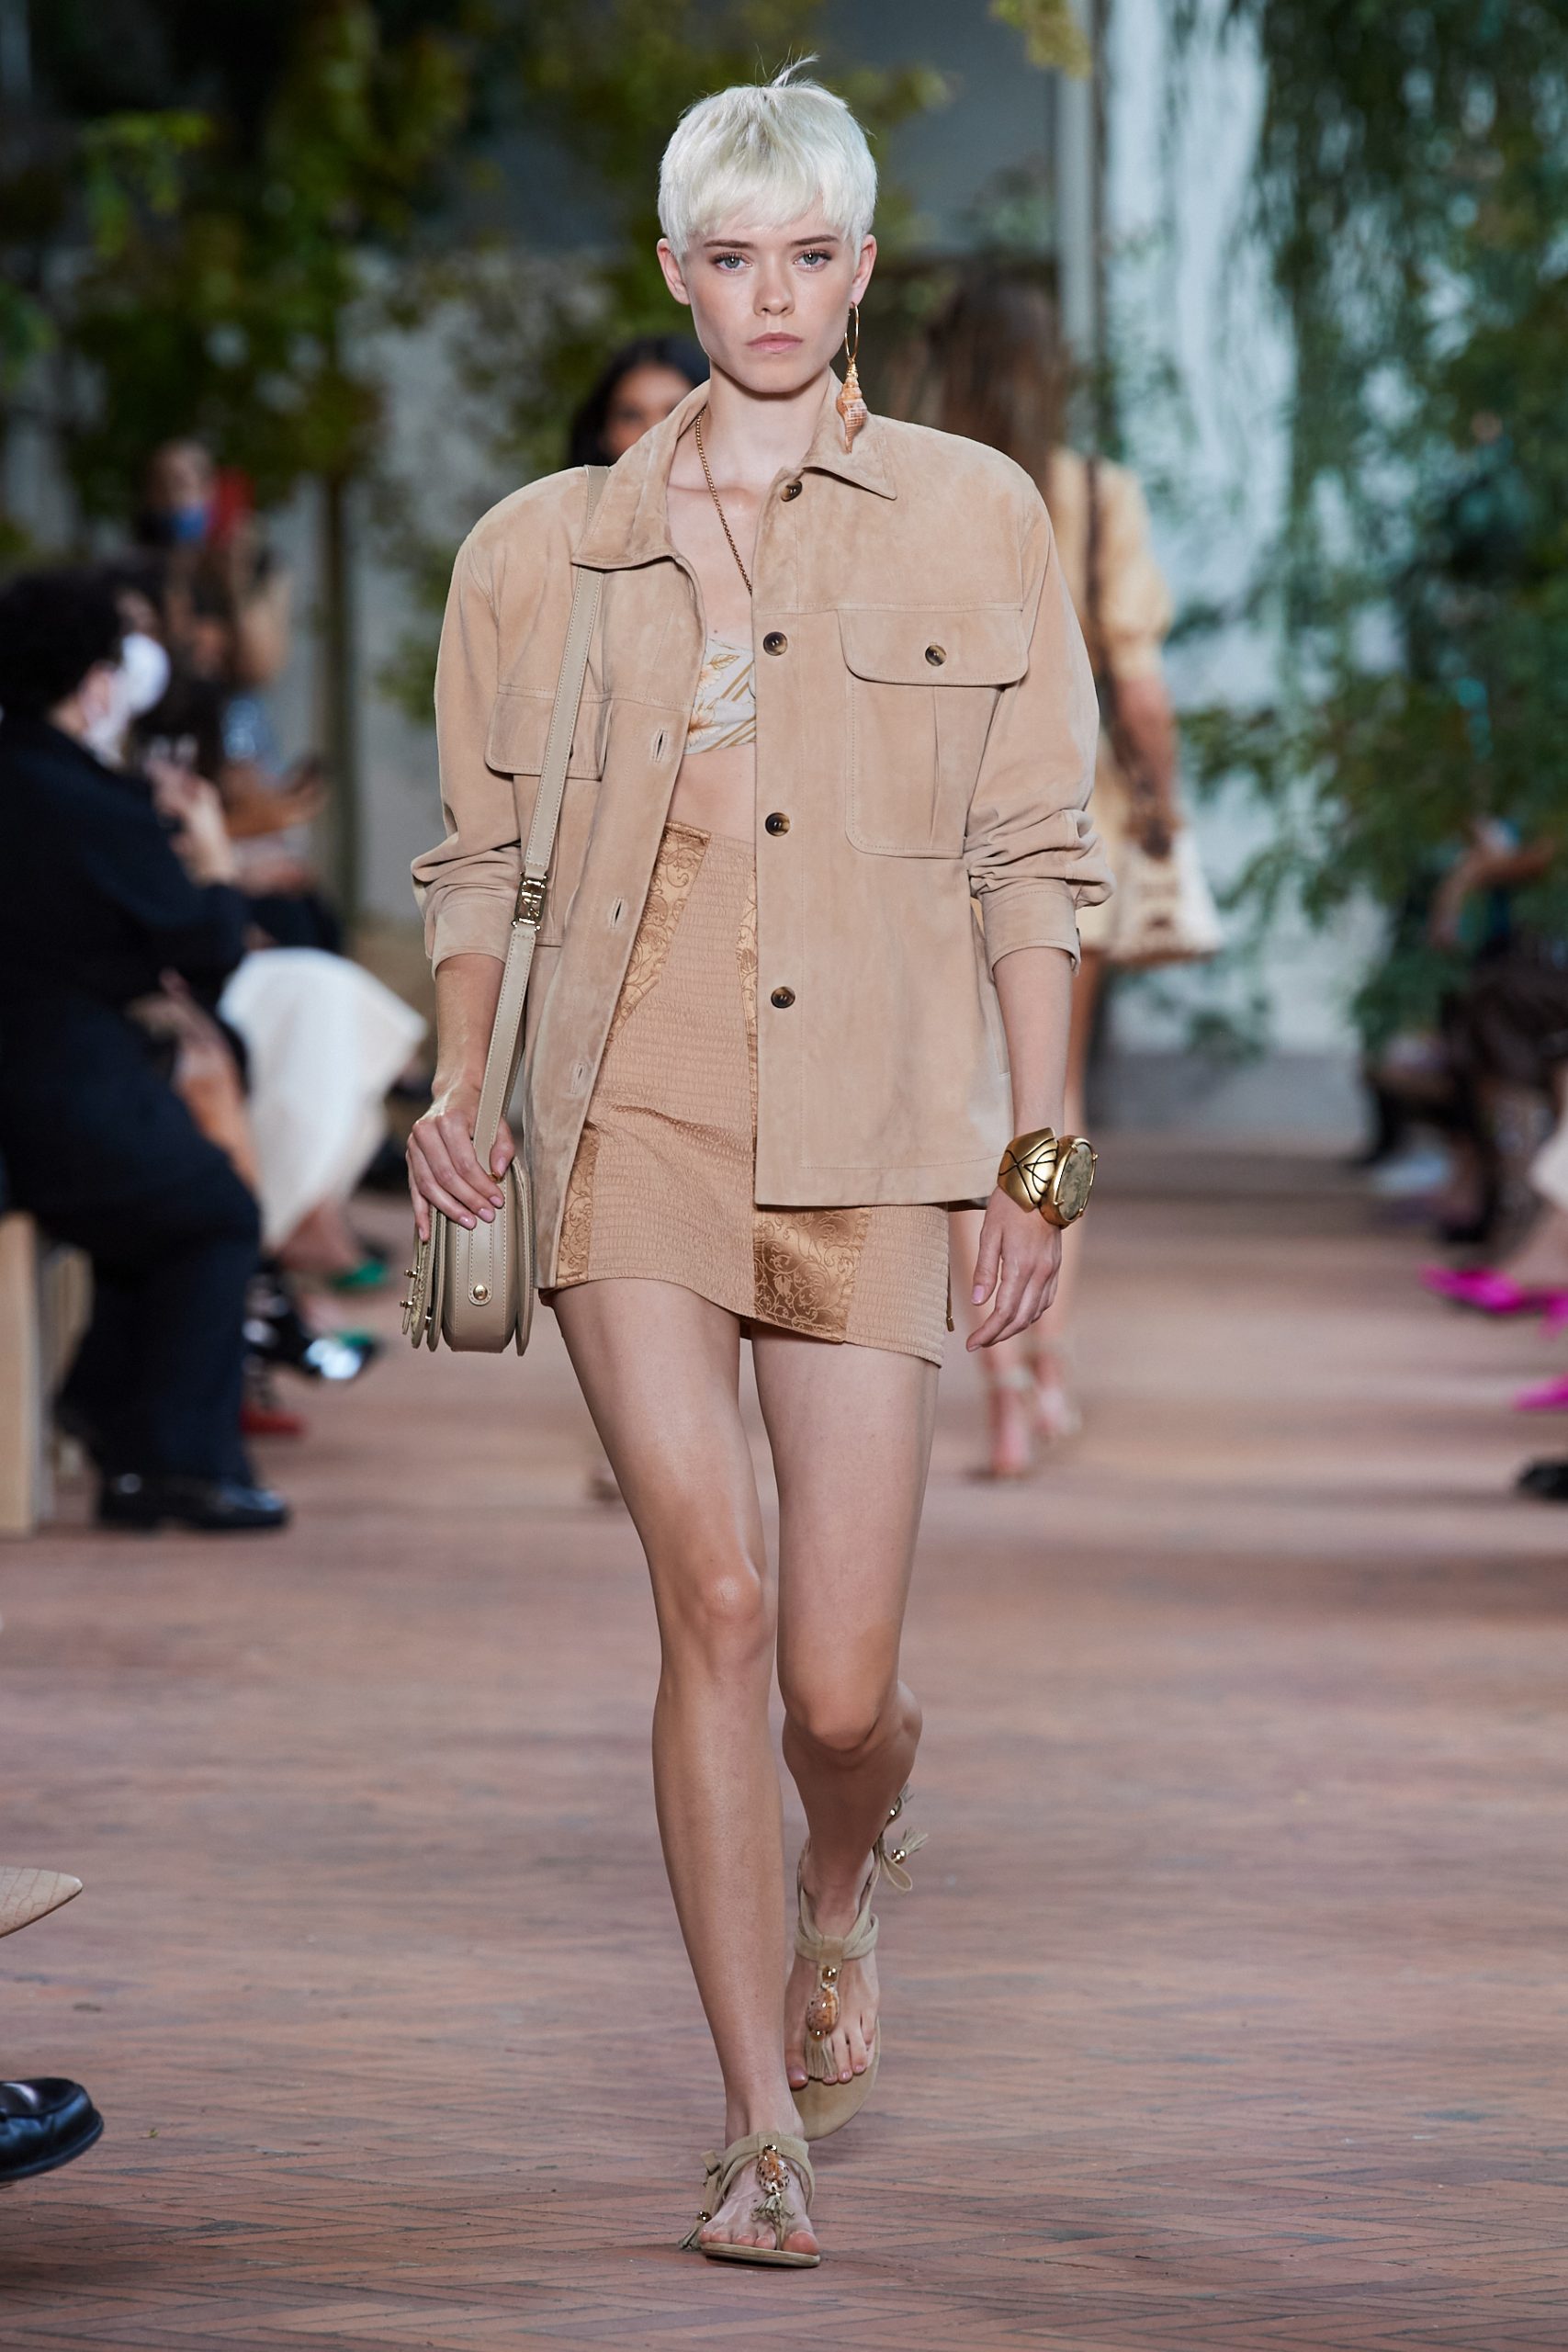 Top 20 Most Popular Runway Models Of Spring 2021 The Impression